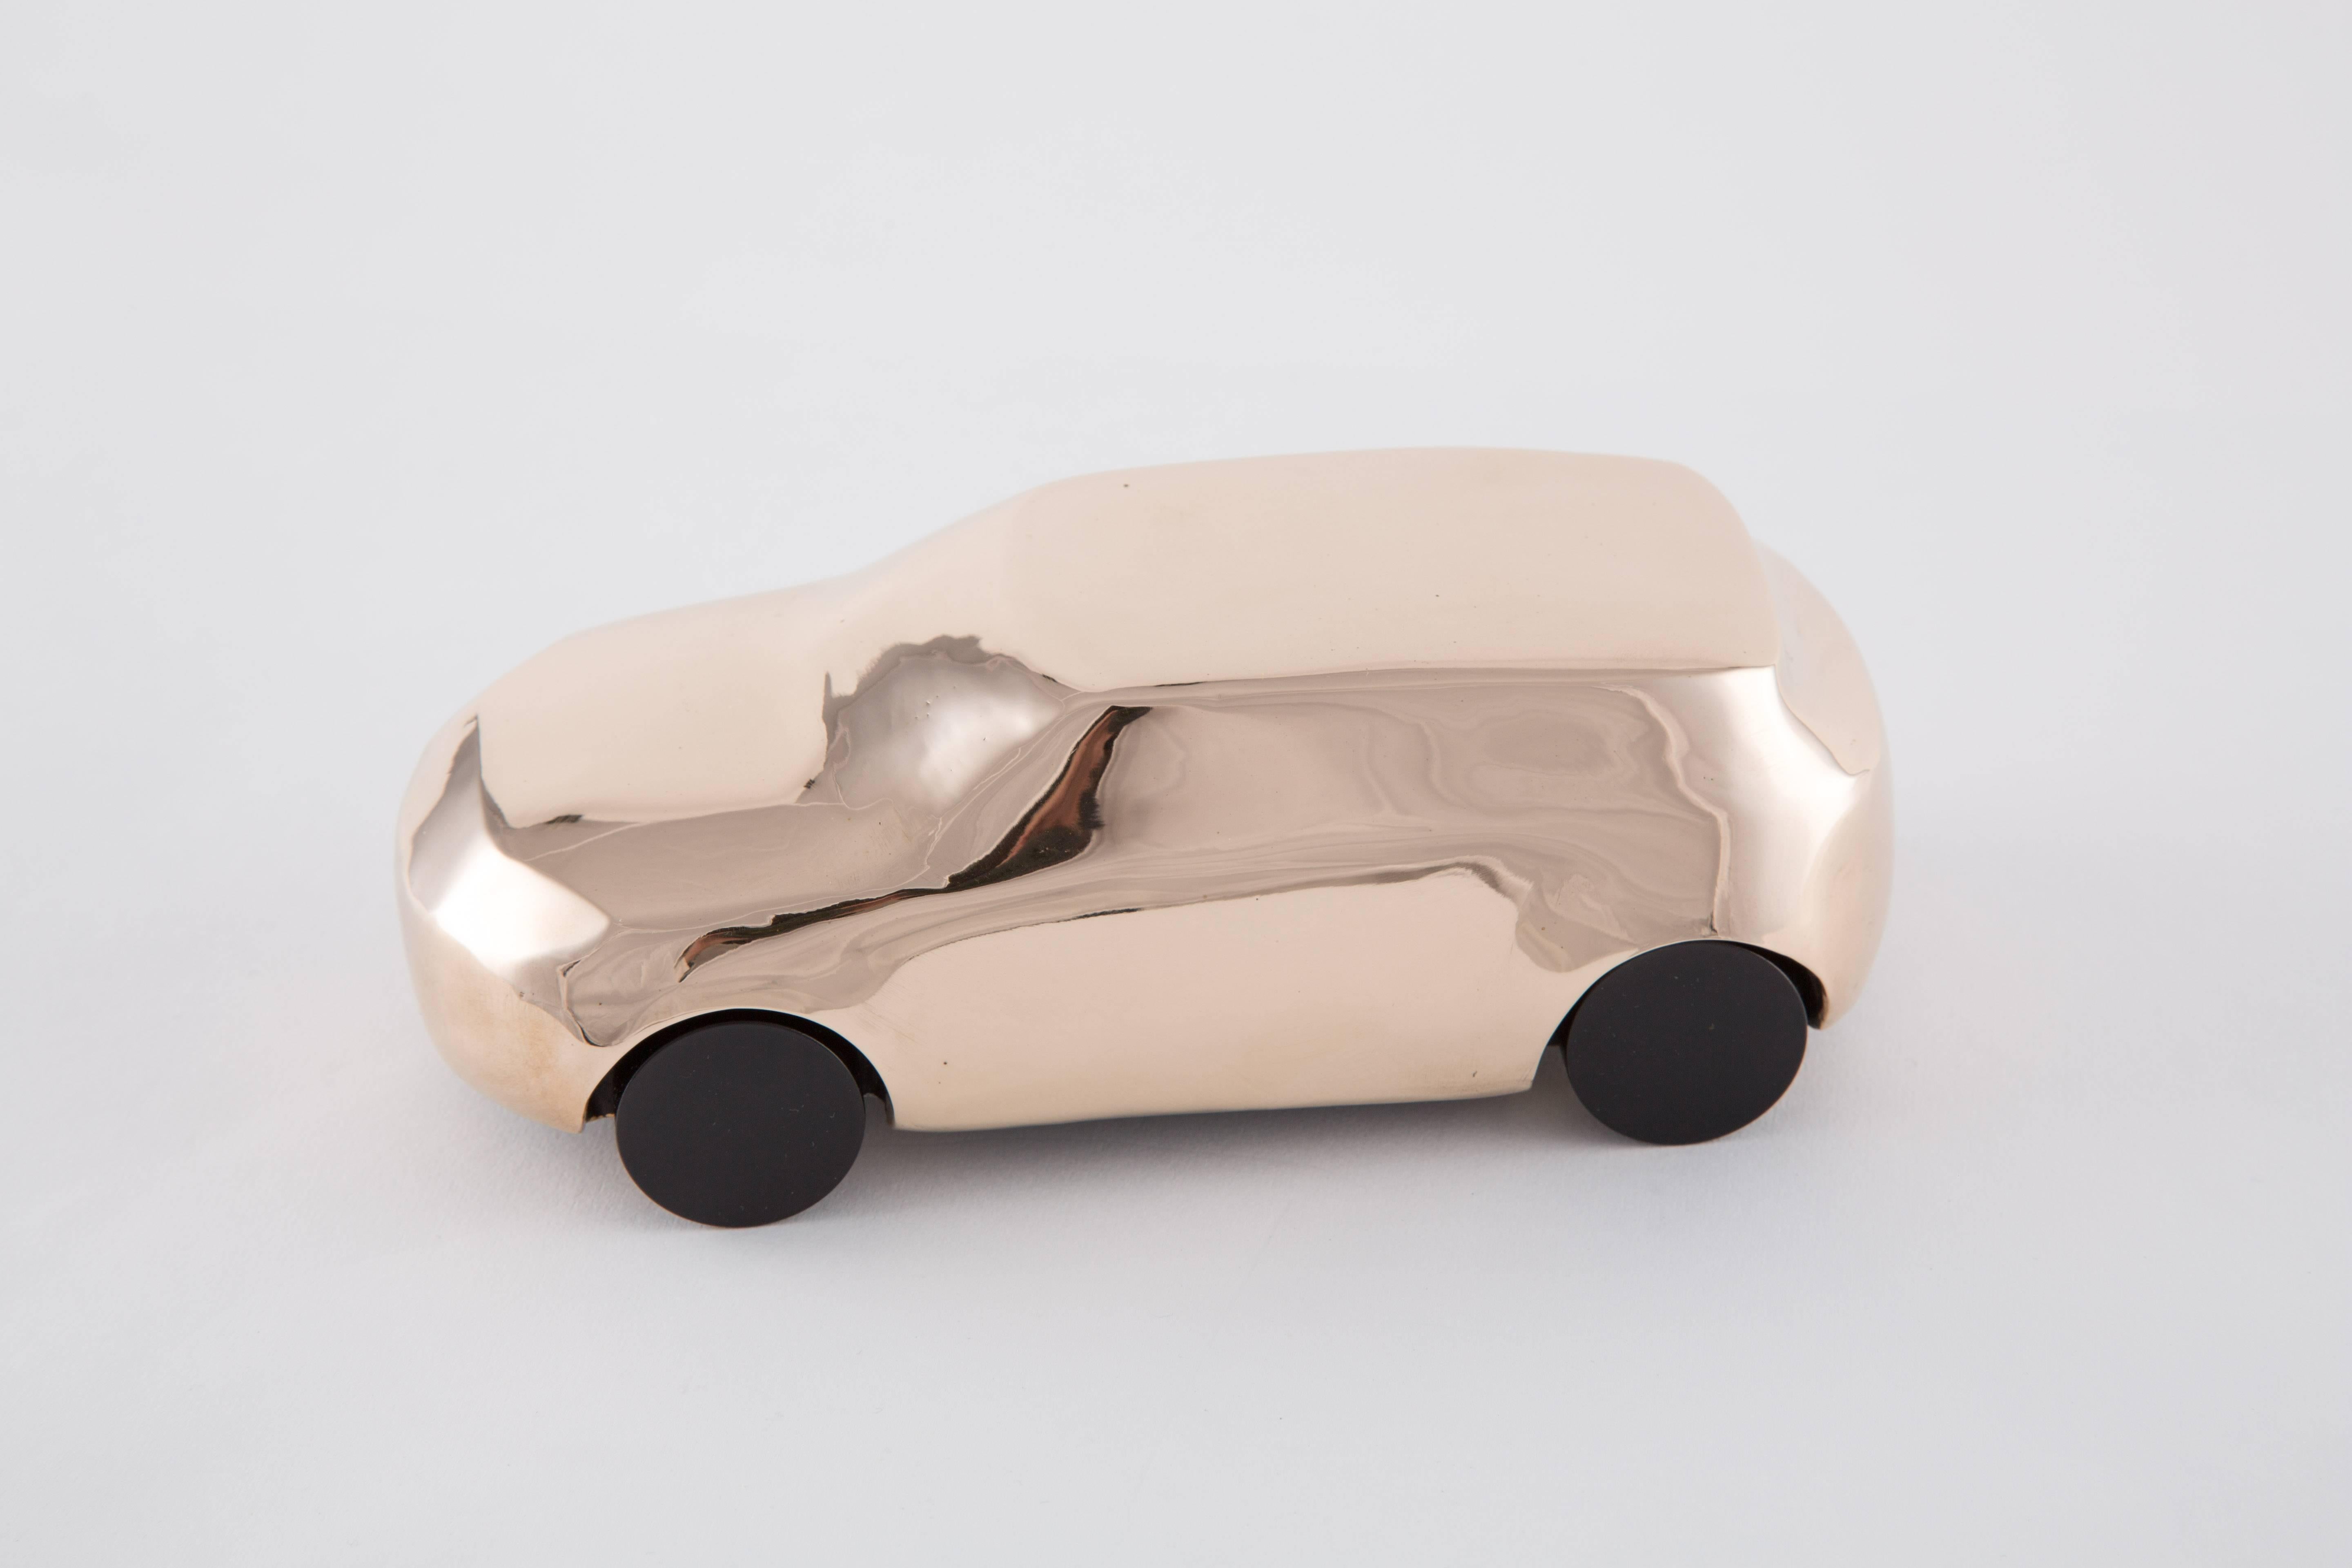 STUDIO JOB for LAND ROVER in bronze limited edition Range Rover Evoque - Sculpture by Studio Job (Job Smeets & Nynke Tynagel)